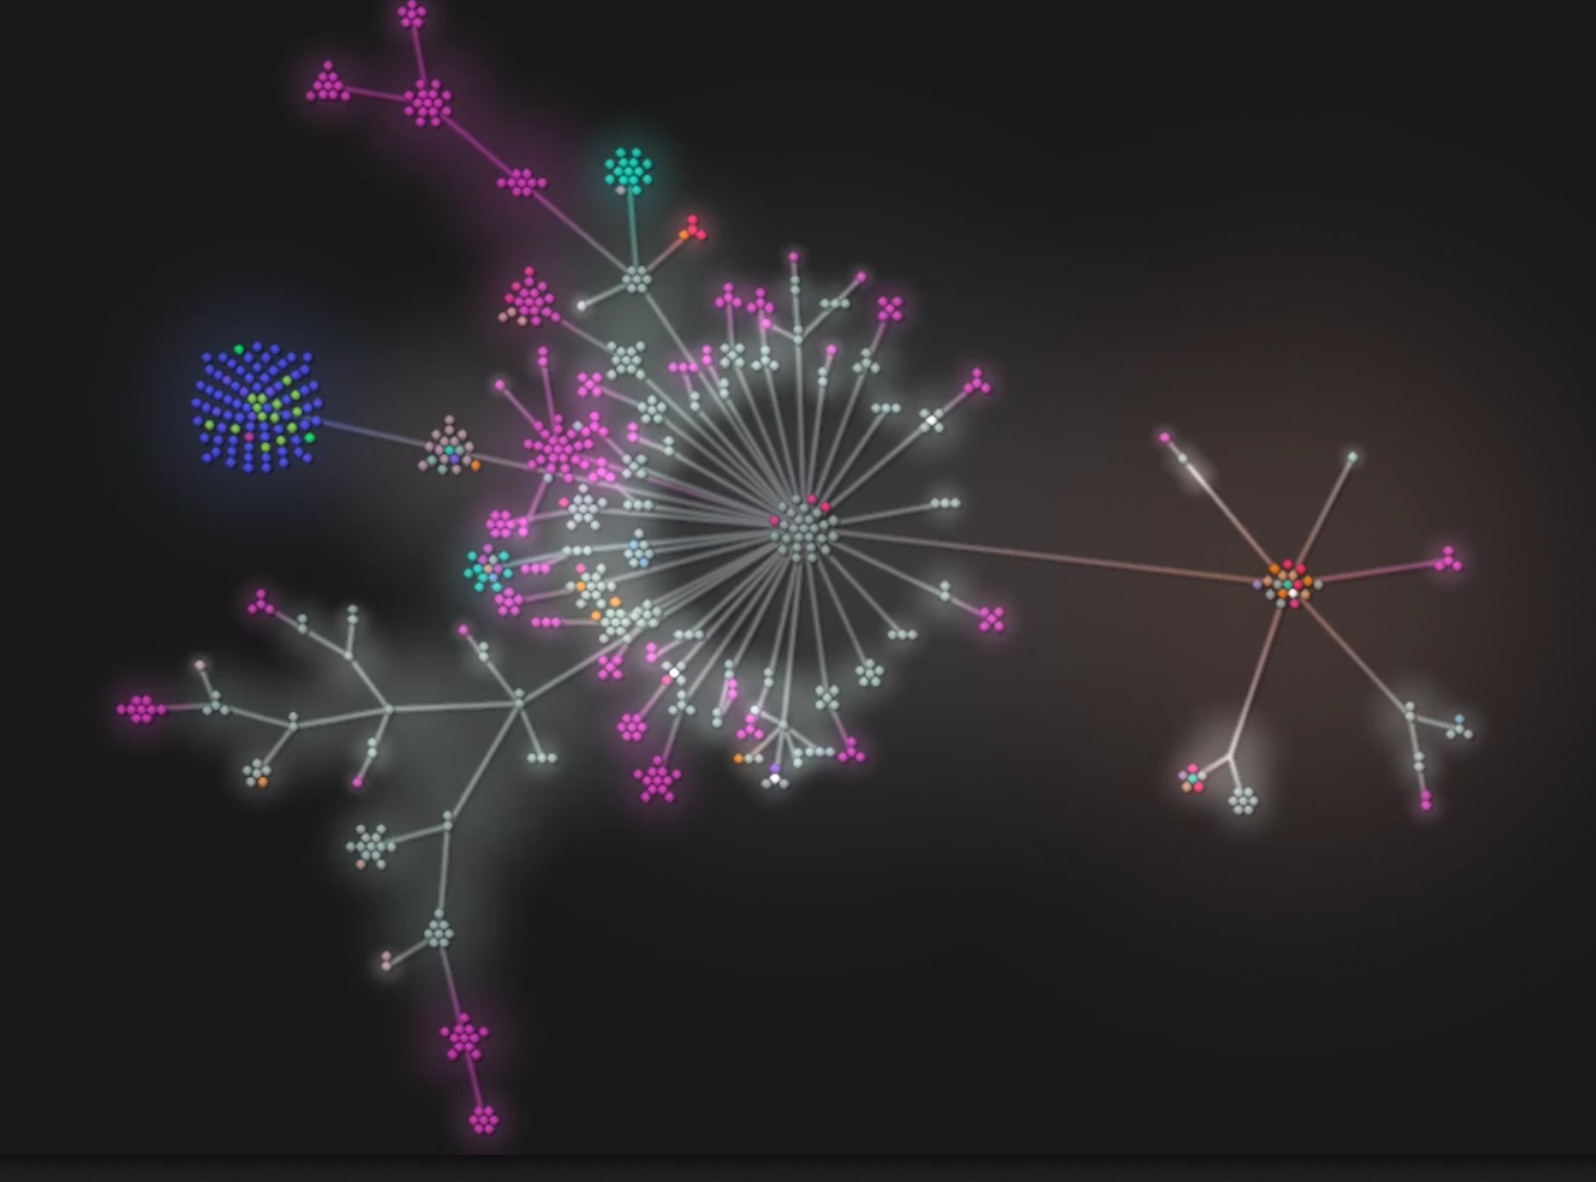 clusters of pink, white, and blue dots, connected by a network of white lines